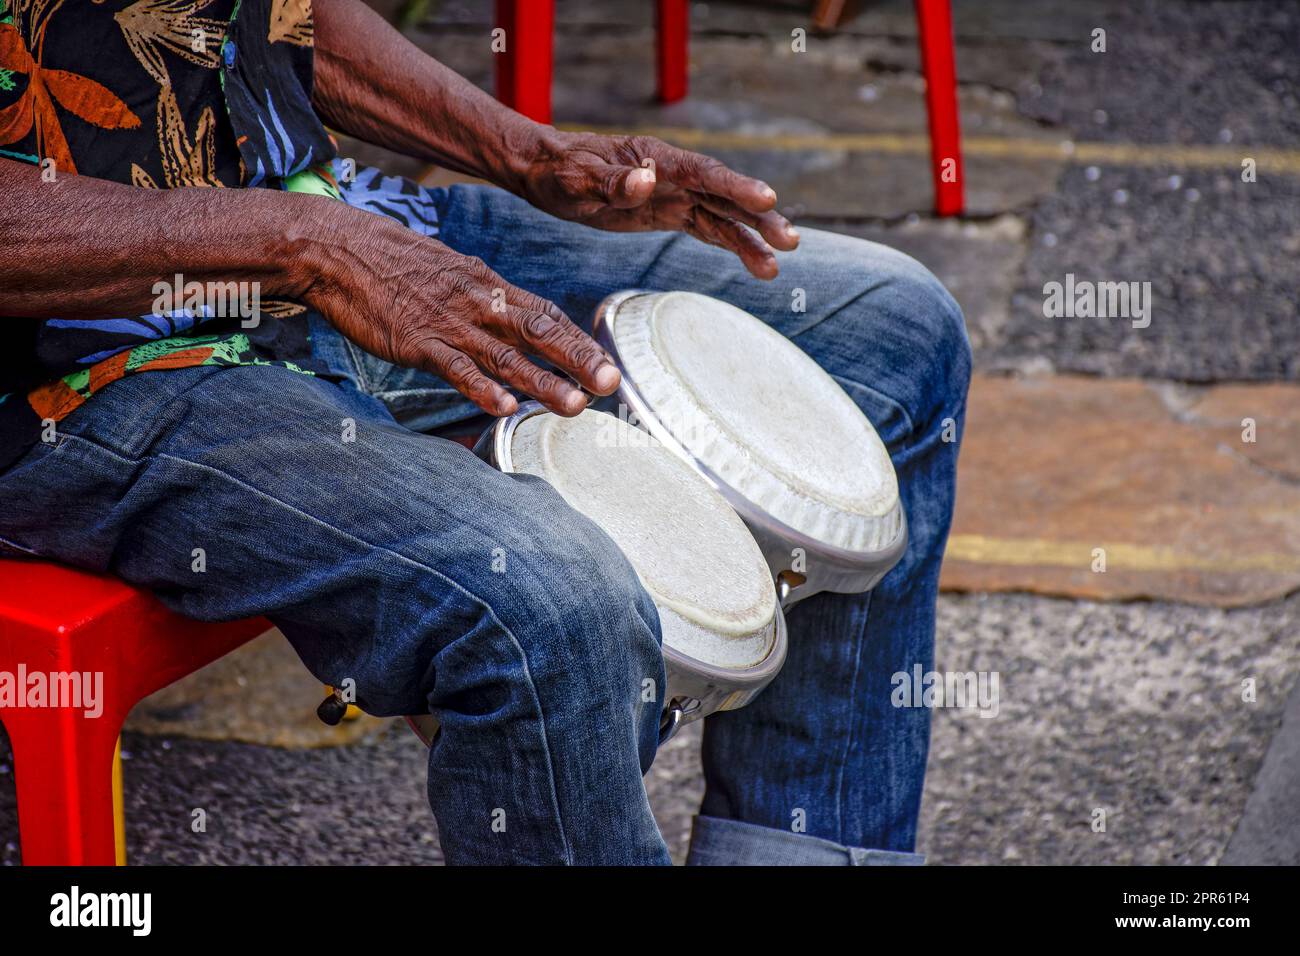 Percussionist playing bongo in street Stock Photo